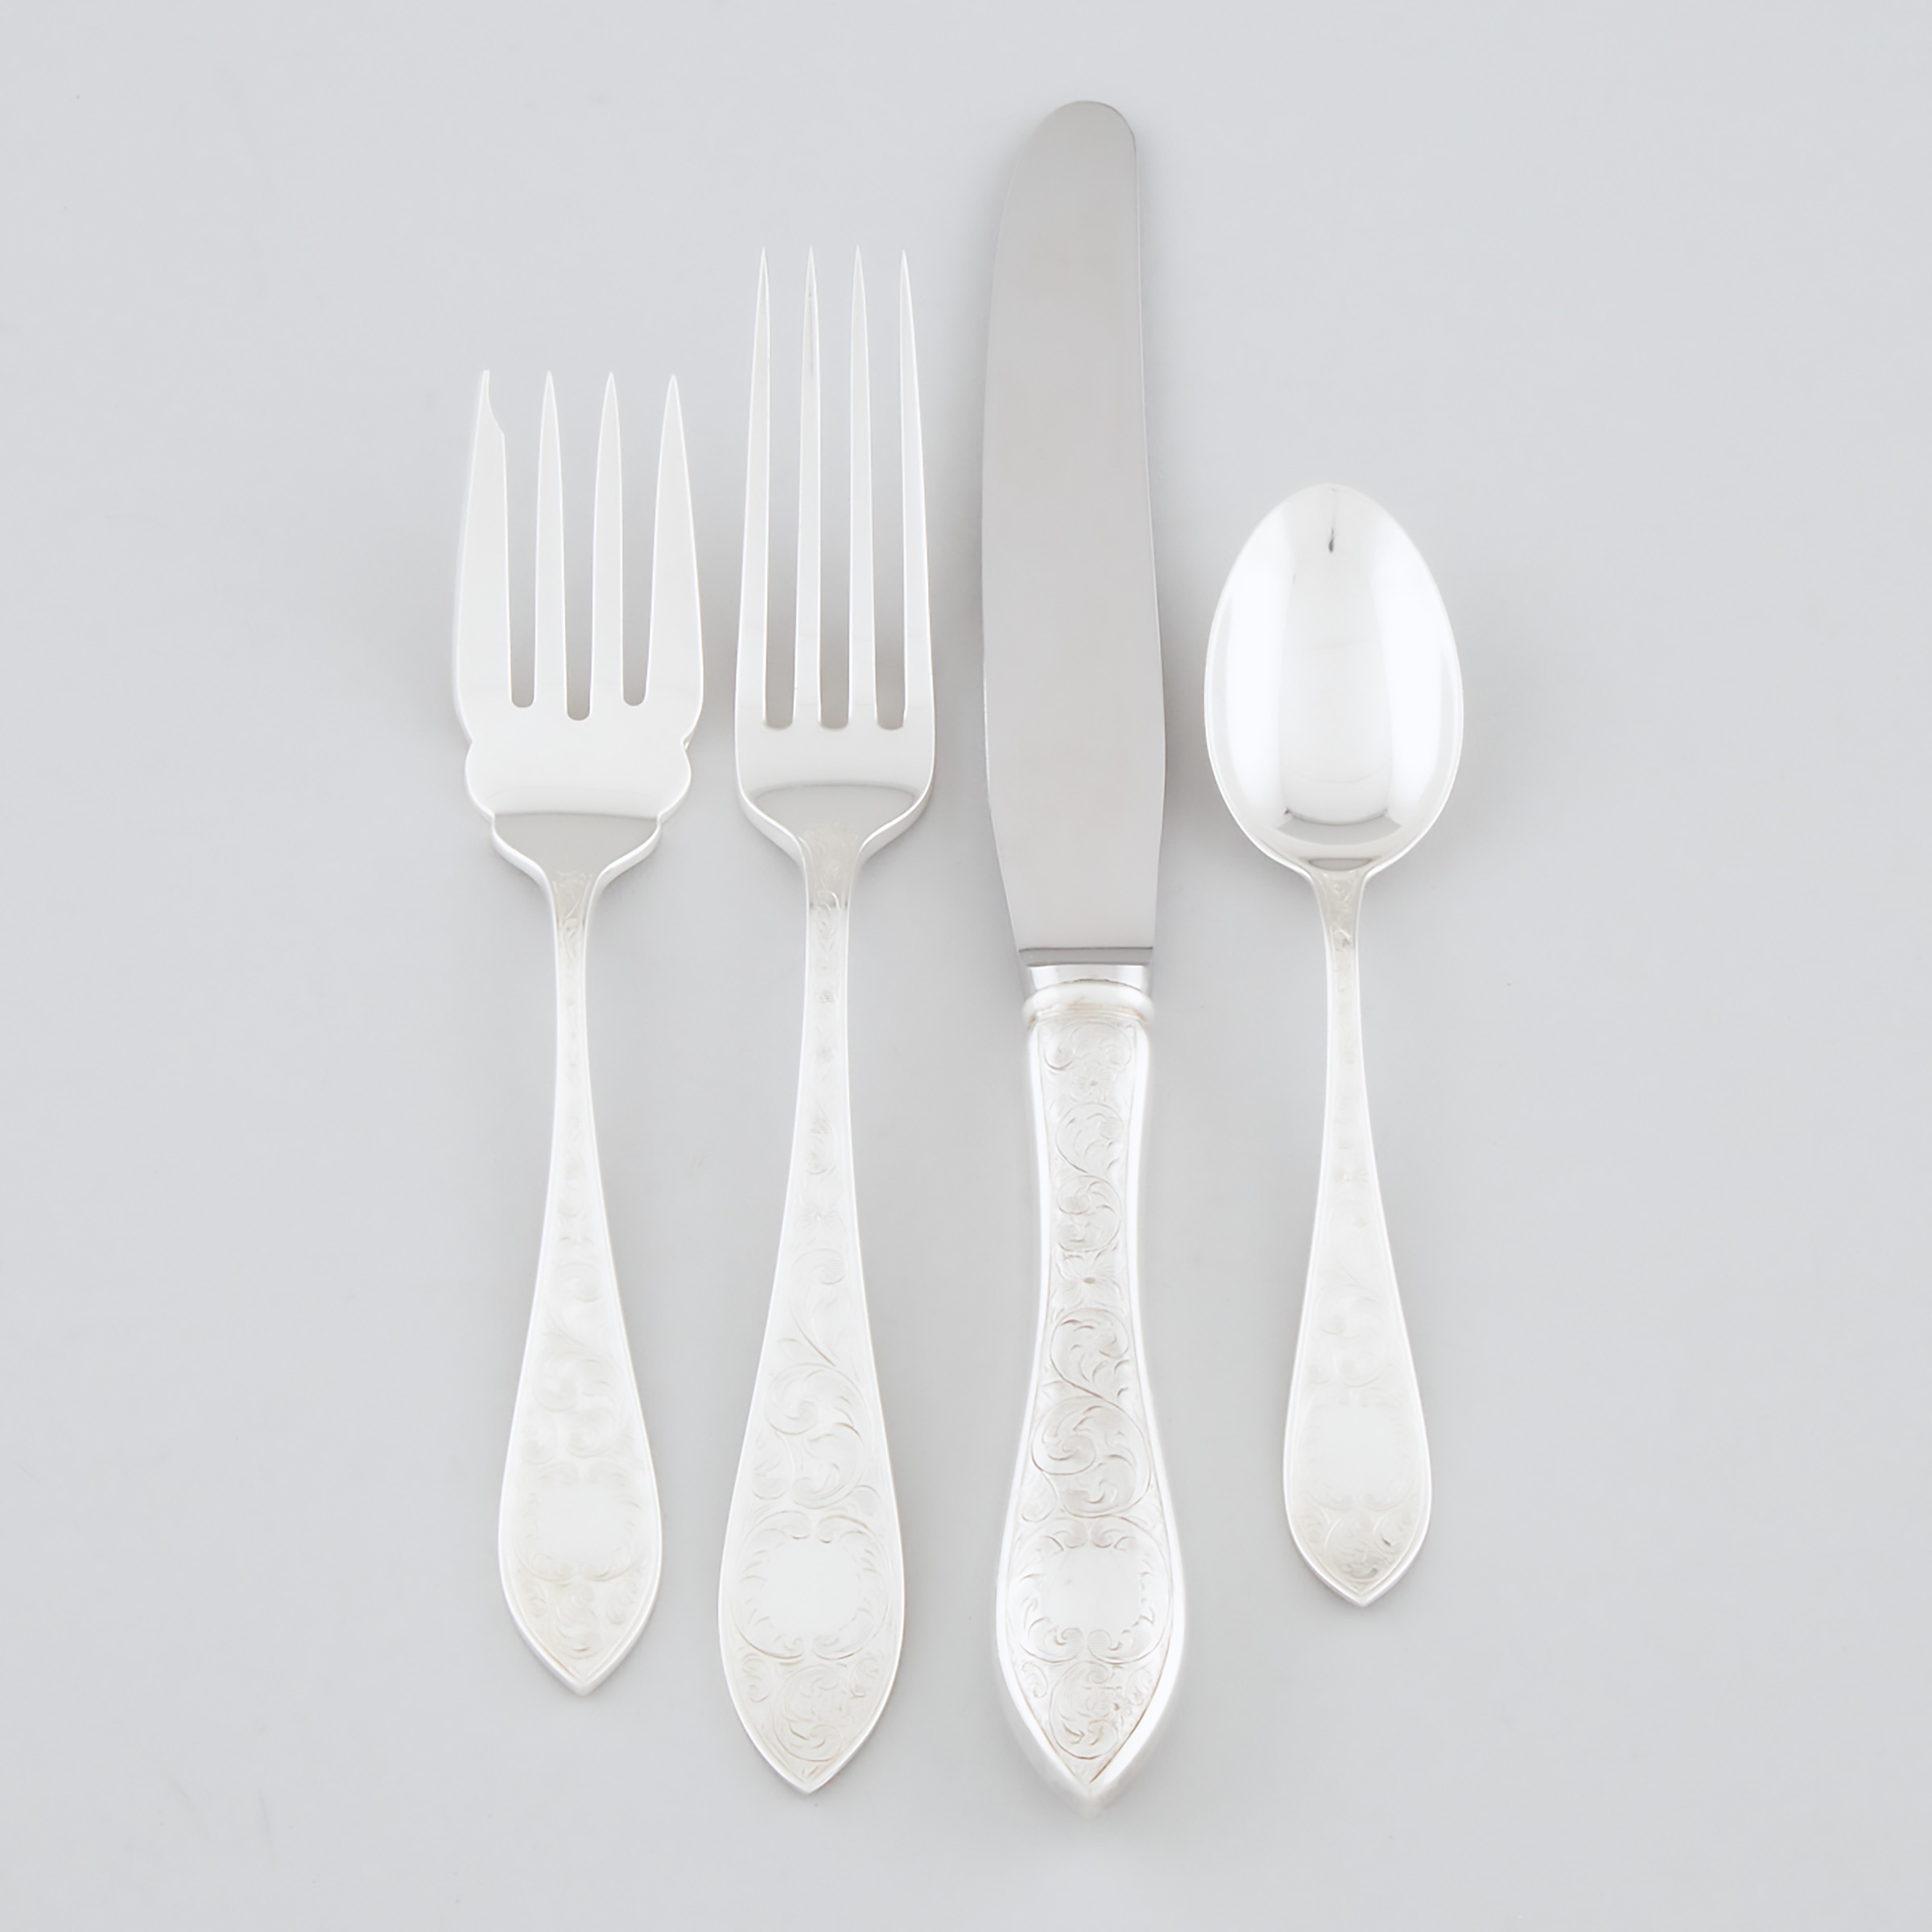 Canadian Silver ‘Tudor Scroll’ Pattern Flatware, Henry Birks & Sons, Montreal, Que., 20th century